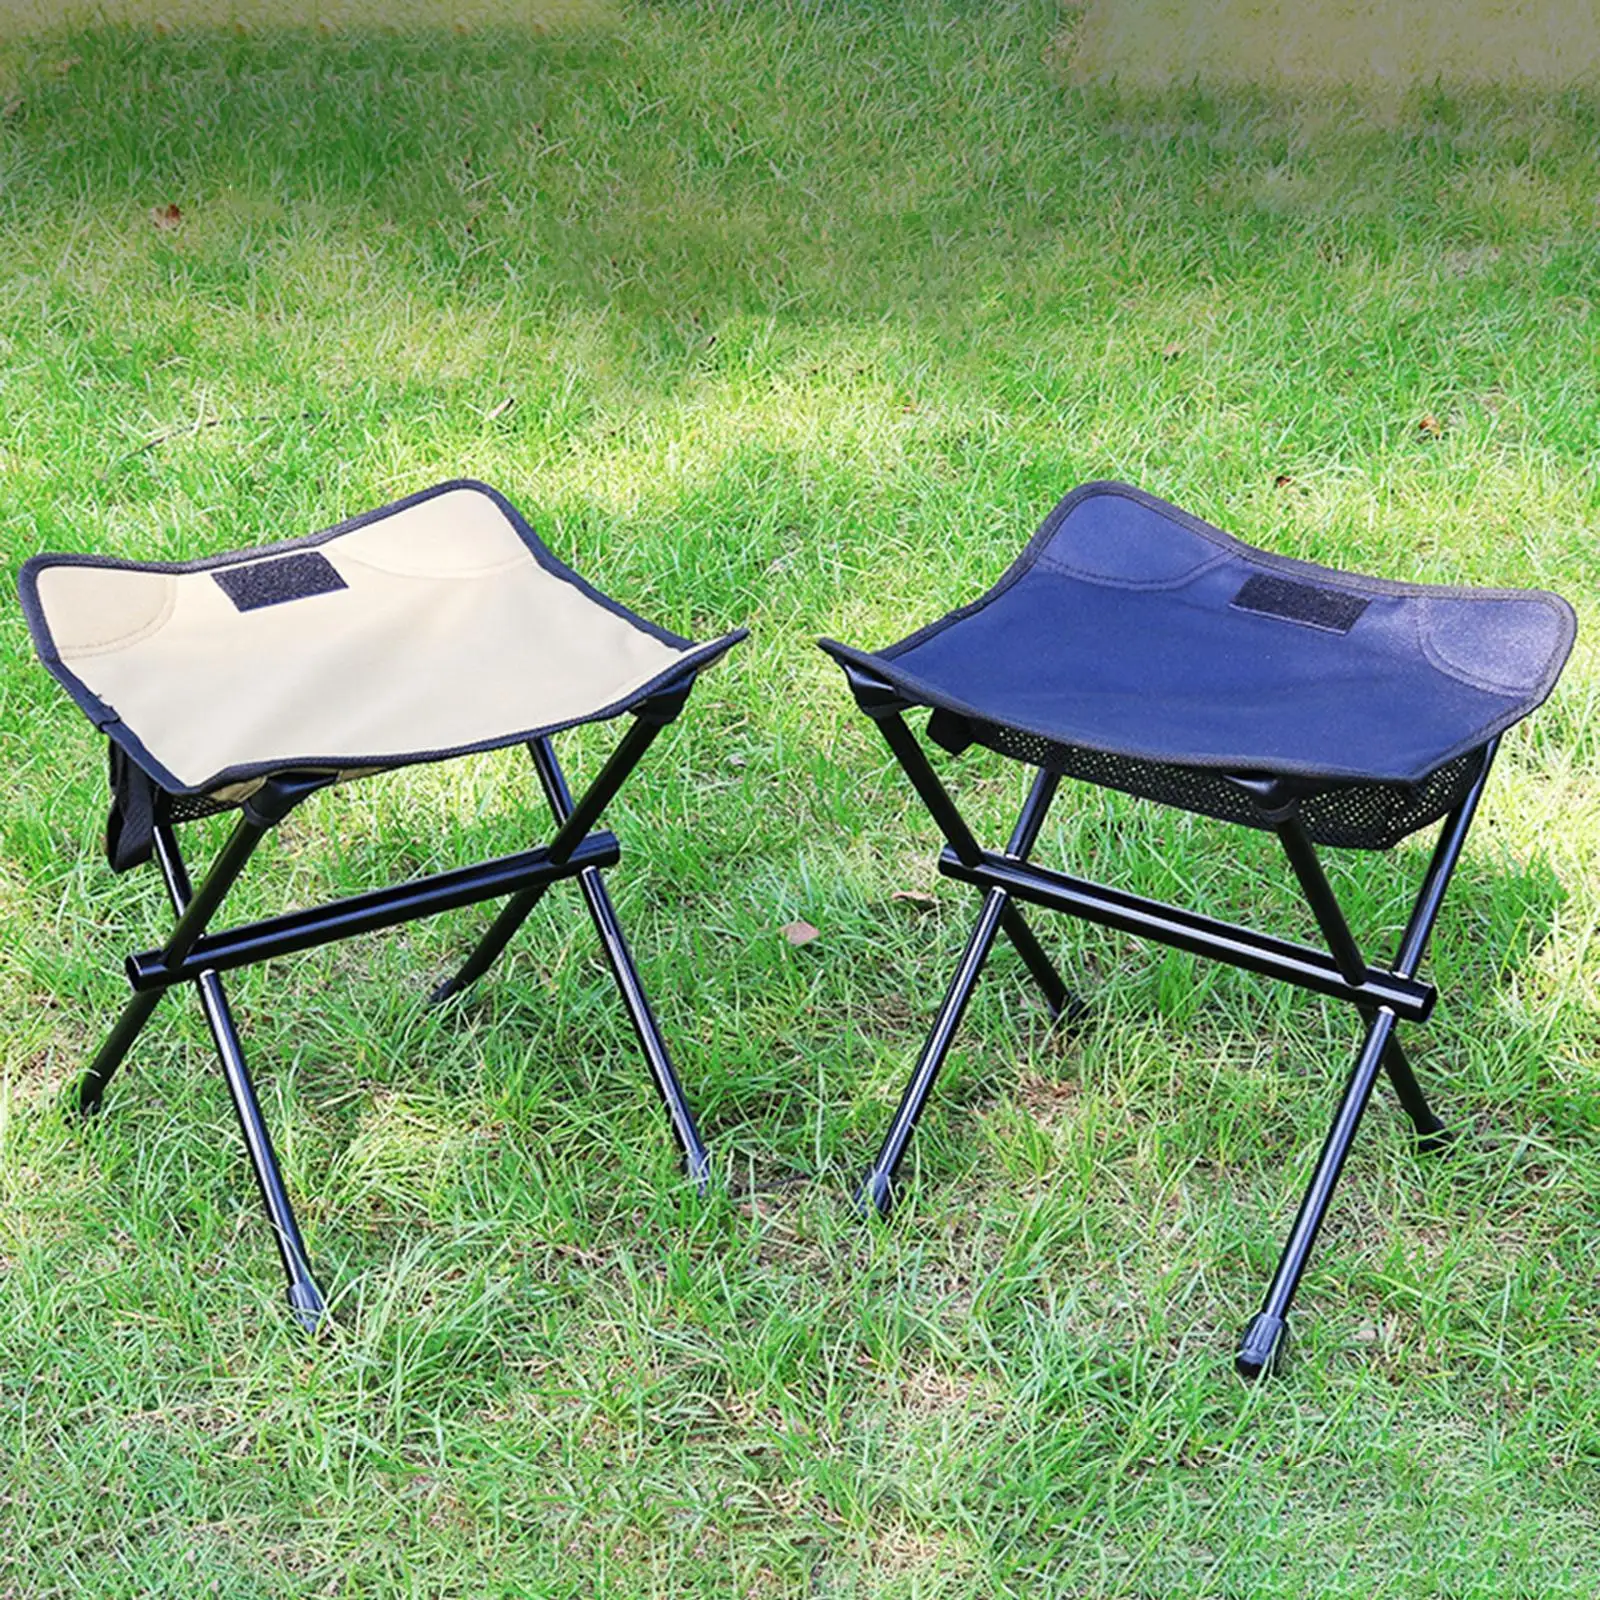 Outdoor Folding Chair Foldable Camping Stool Collapsible Stool Hiking Fishing - £20.27 GBP